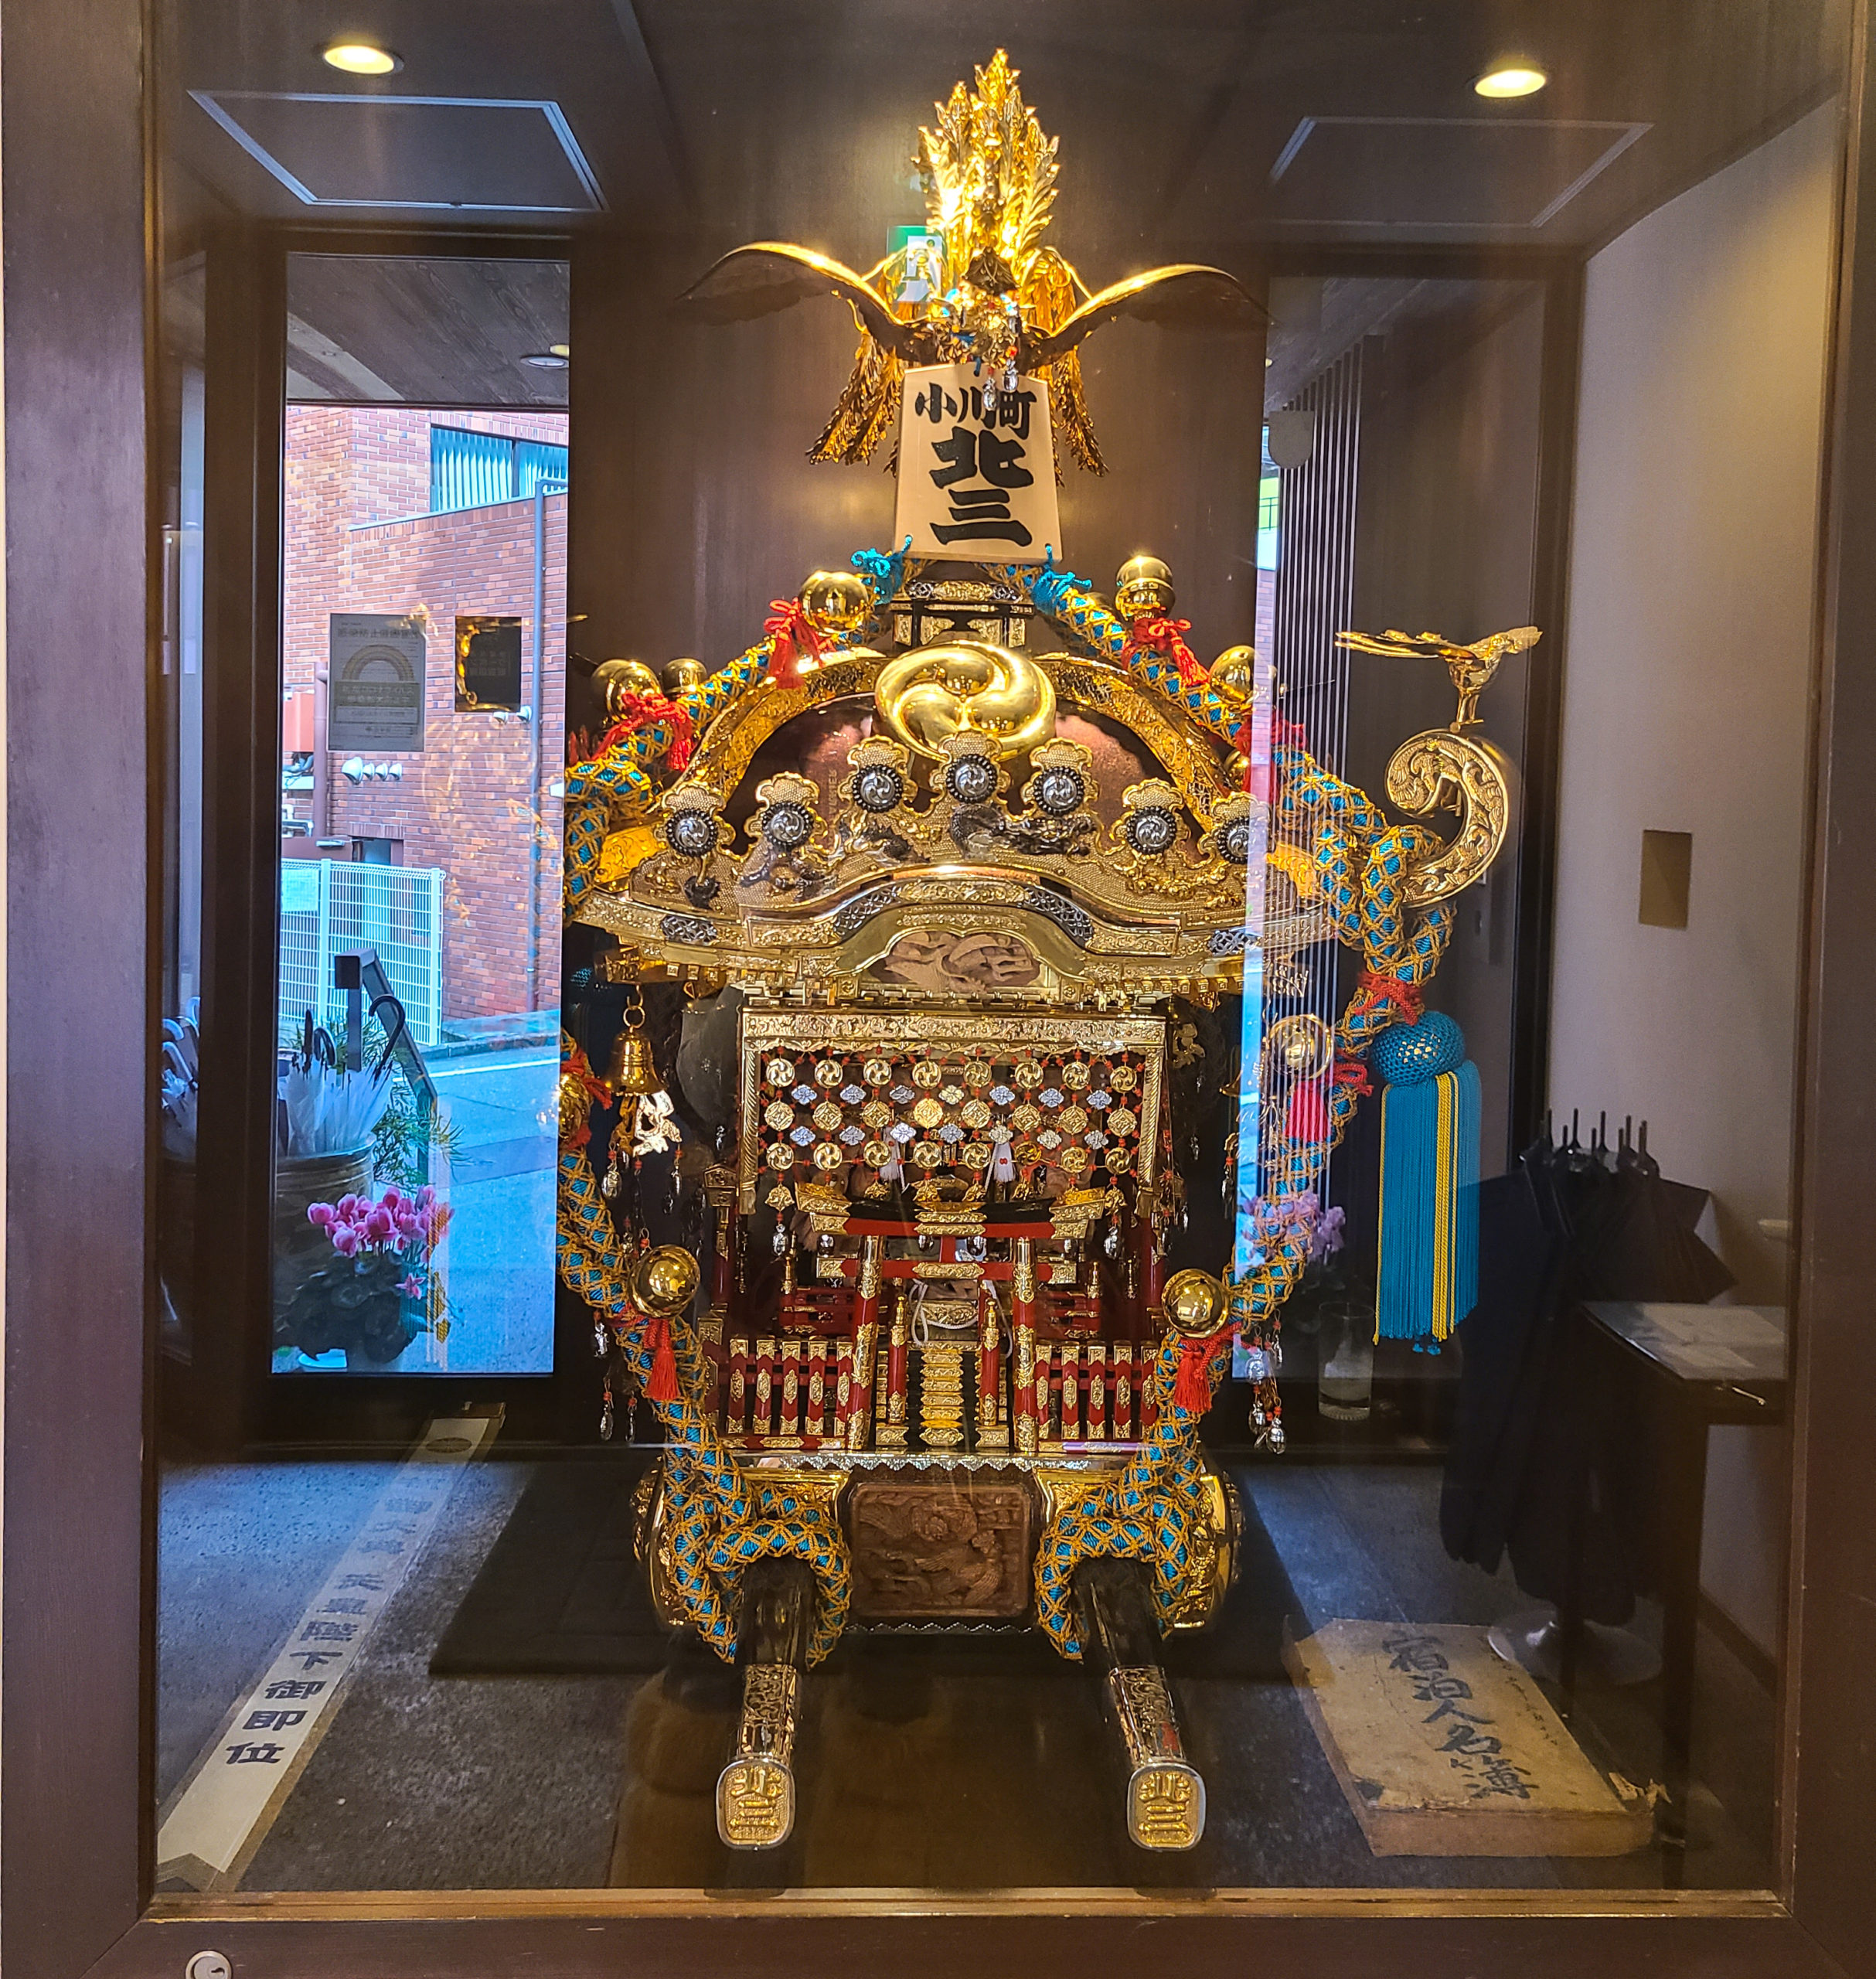 The omikoshi displayed in the lobby